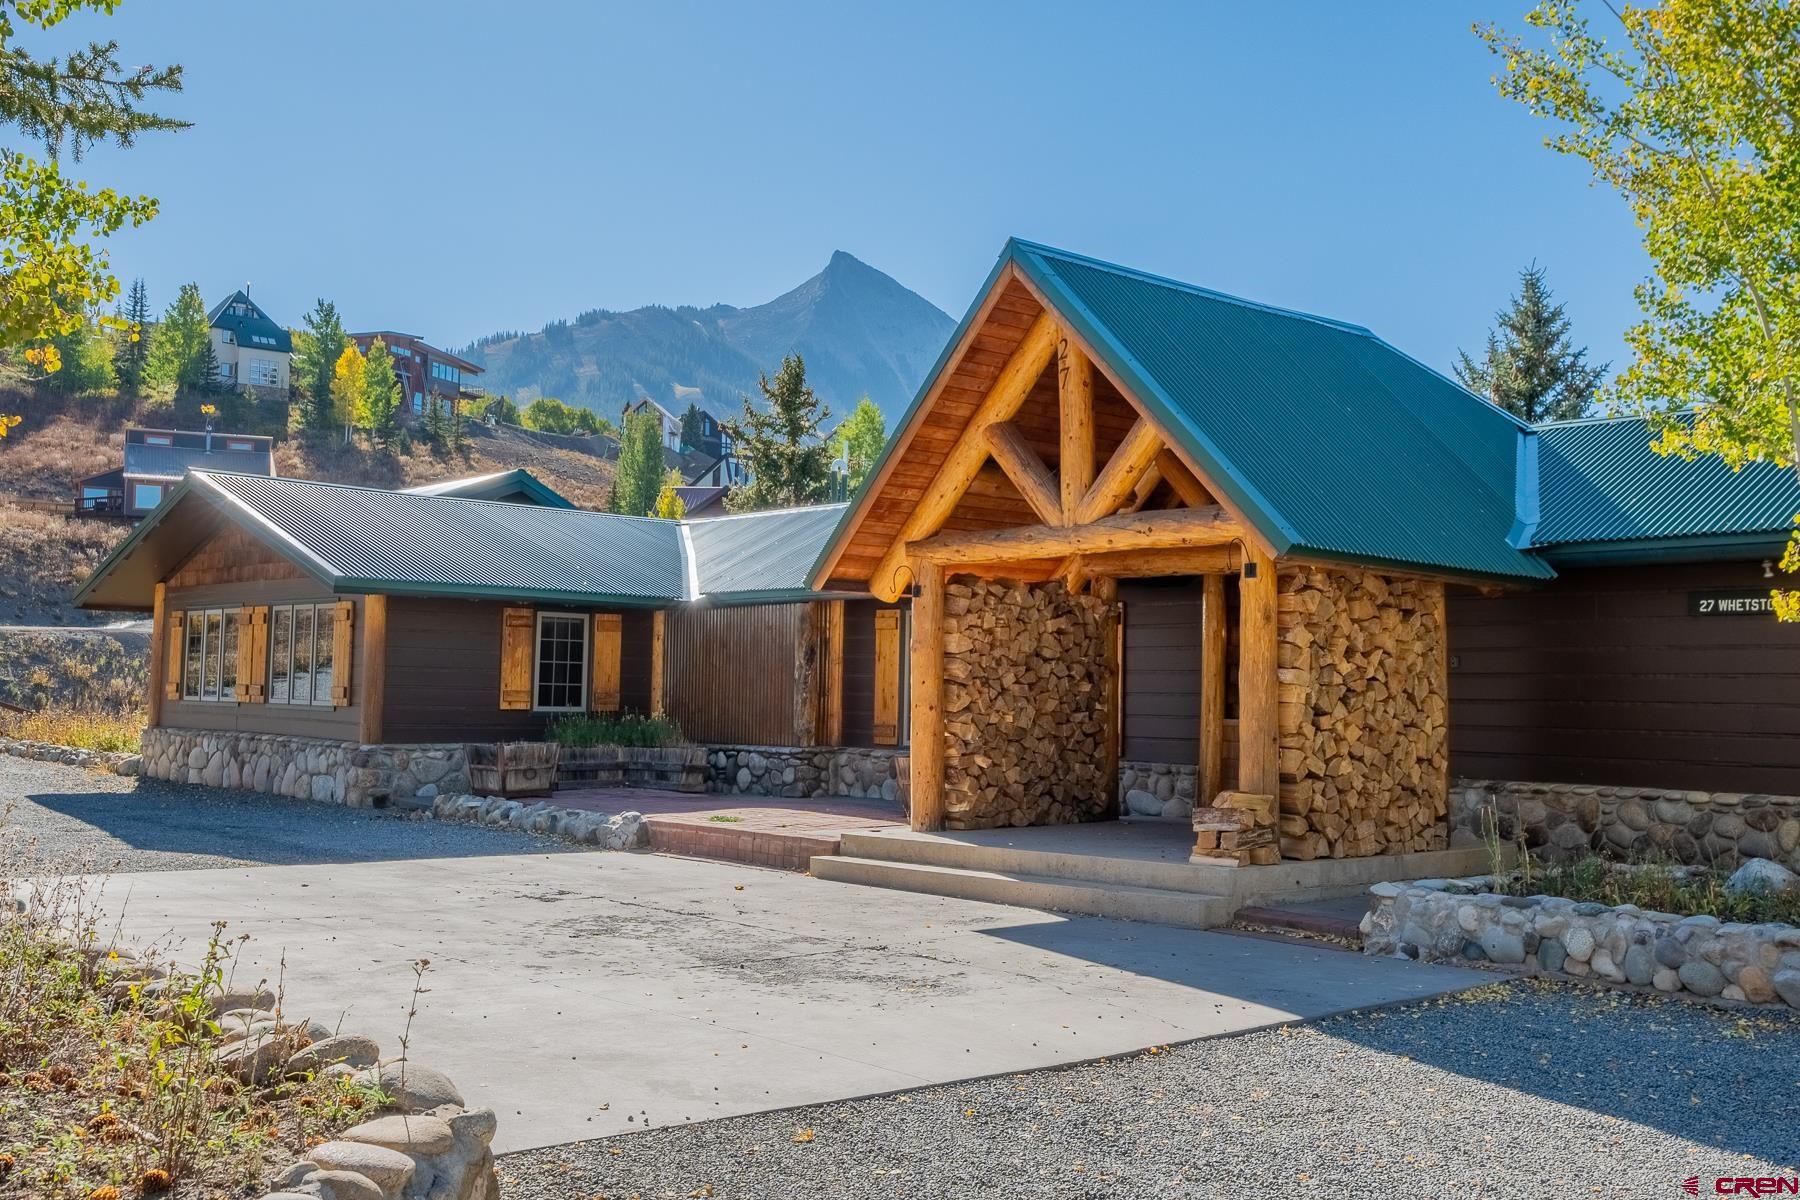 27 Whetstone Road, Mt. Crested Butte, CO 